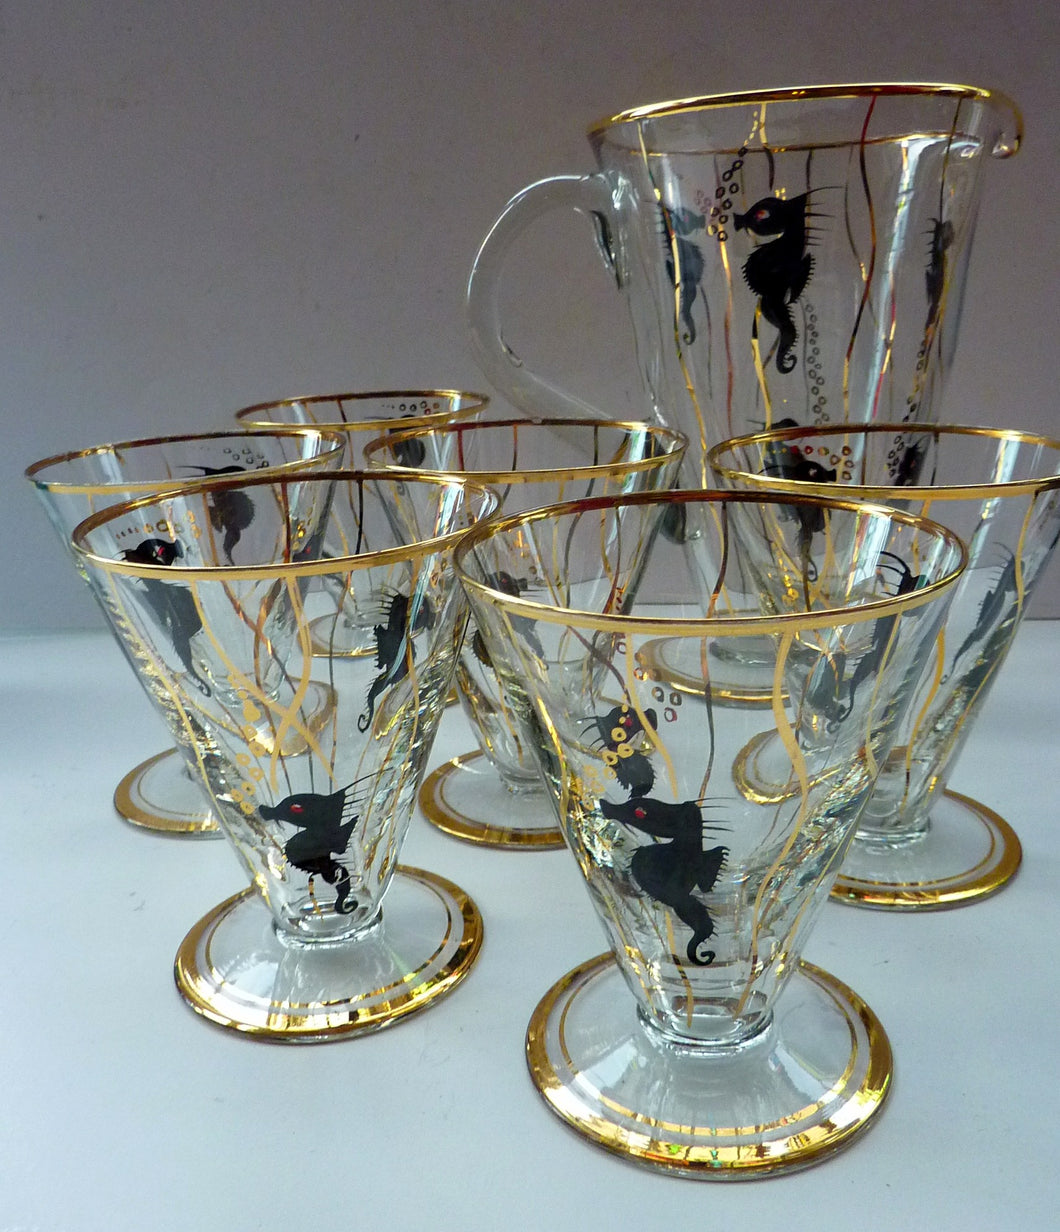 Set of SIX 1950s Cocktail Glasses Decorated with Seahorses. Plus Tall Glass Mixing Jug